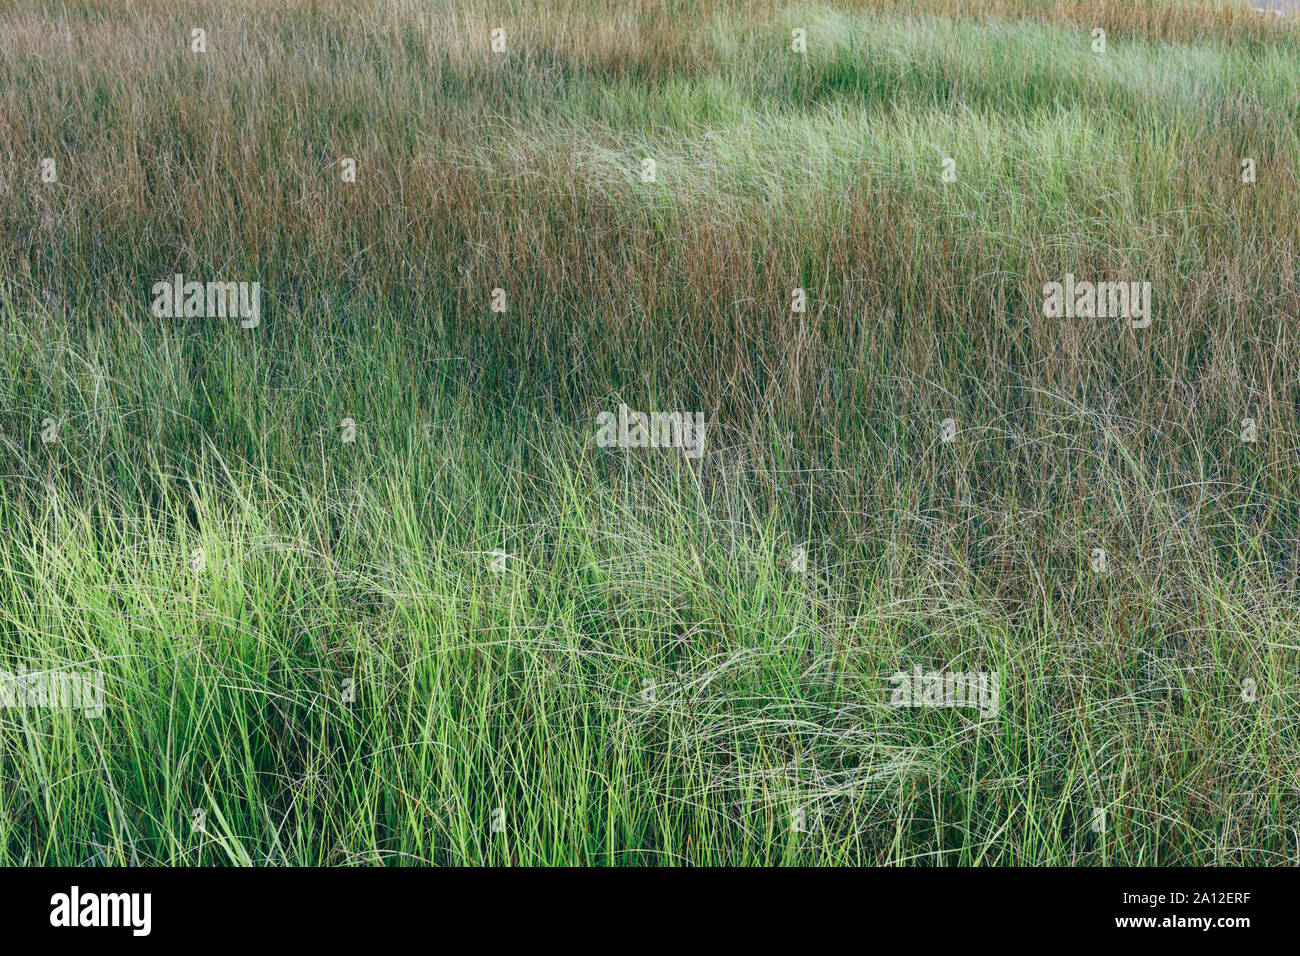 Marshes and lush green grass growth in summer. Stock Photo